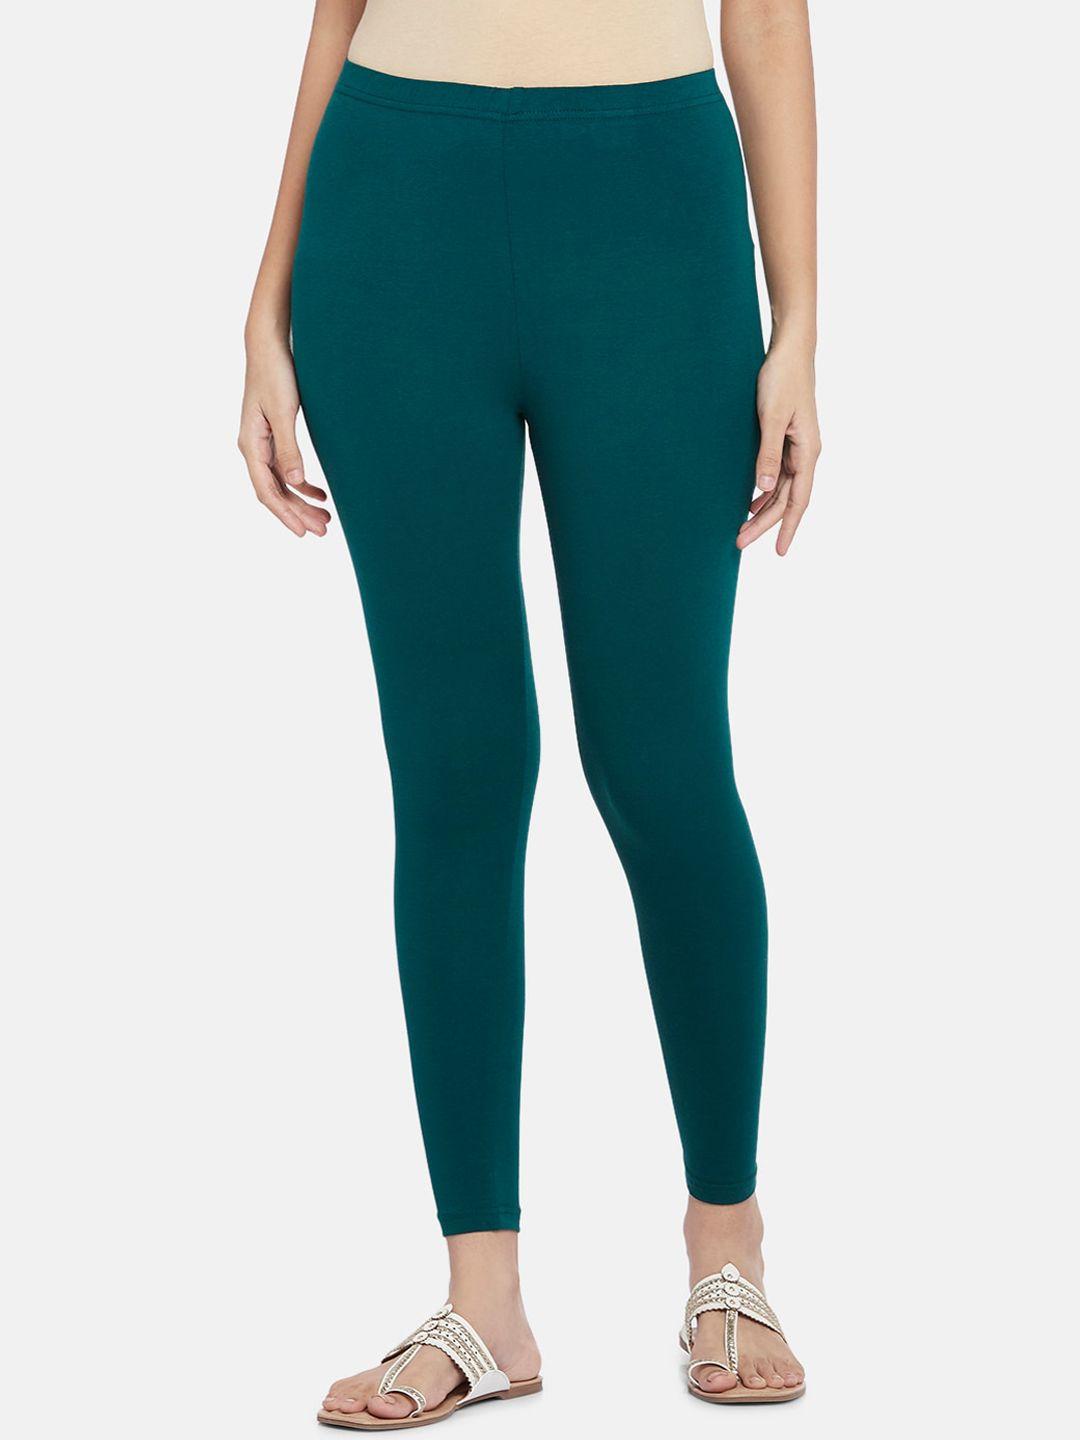 rangmanch by pantaloons women teal solid ankle-length leggings